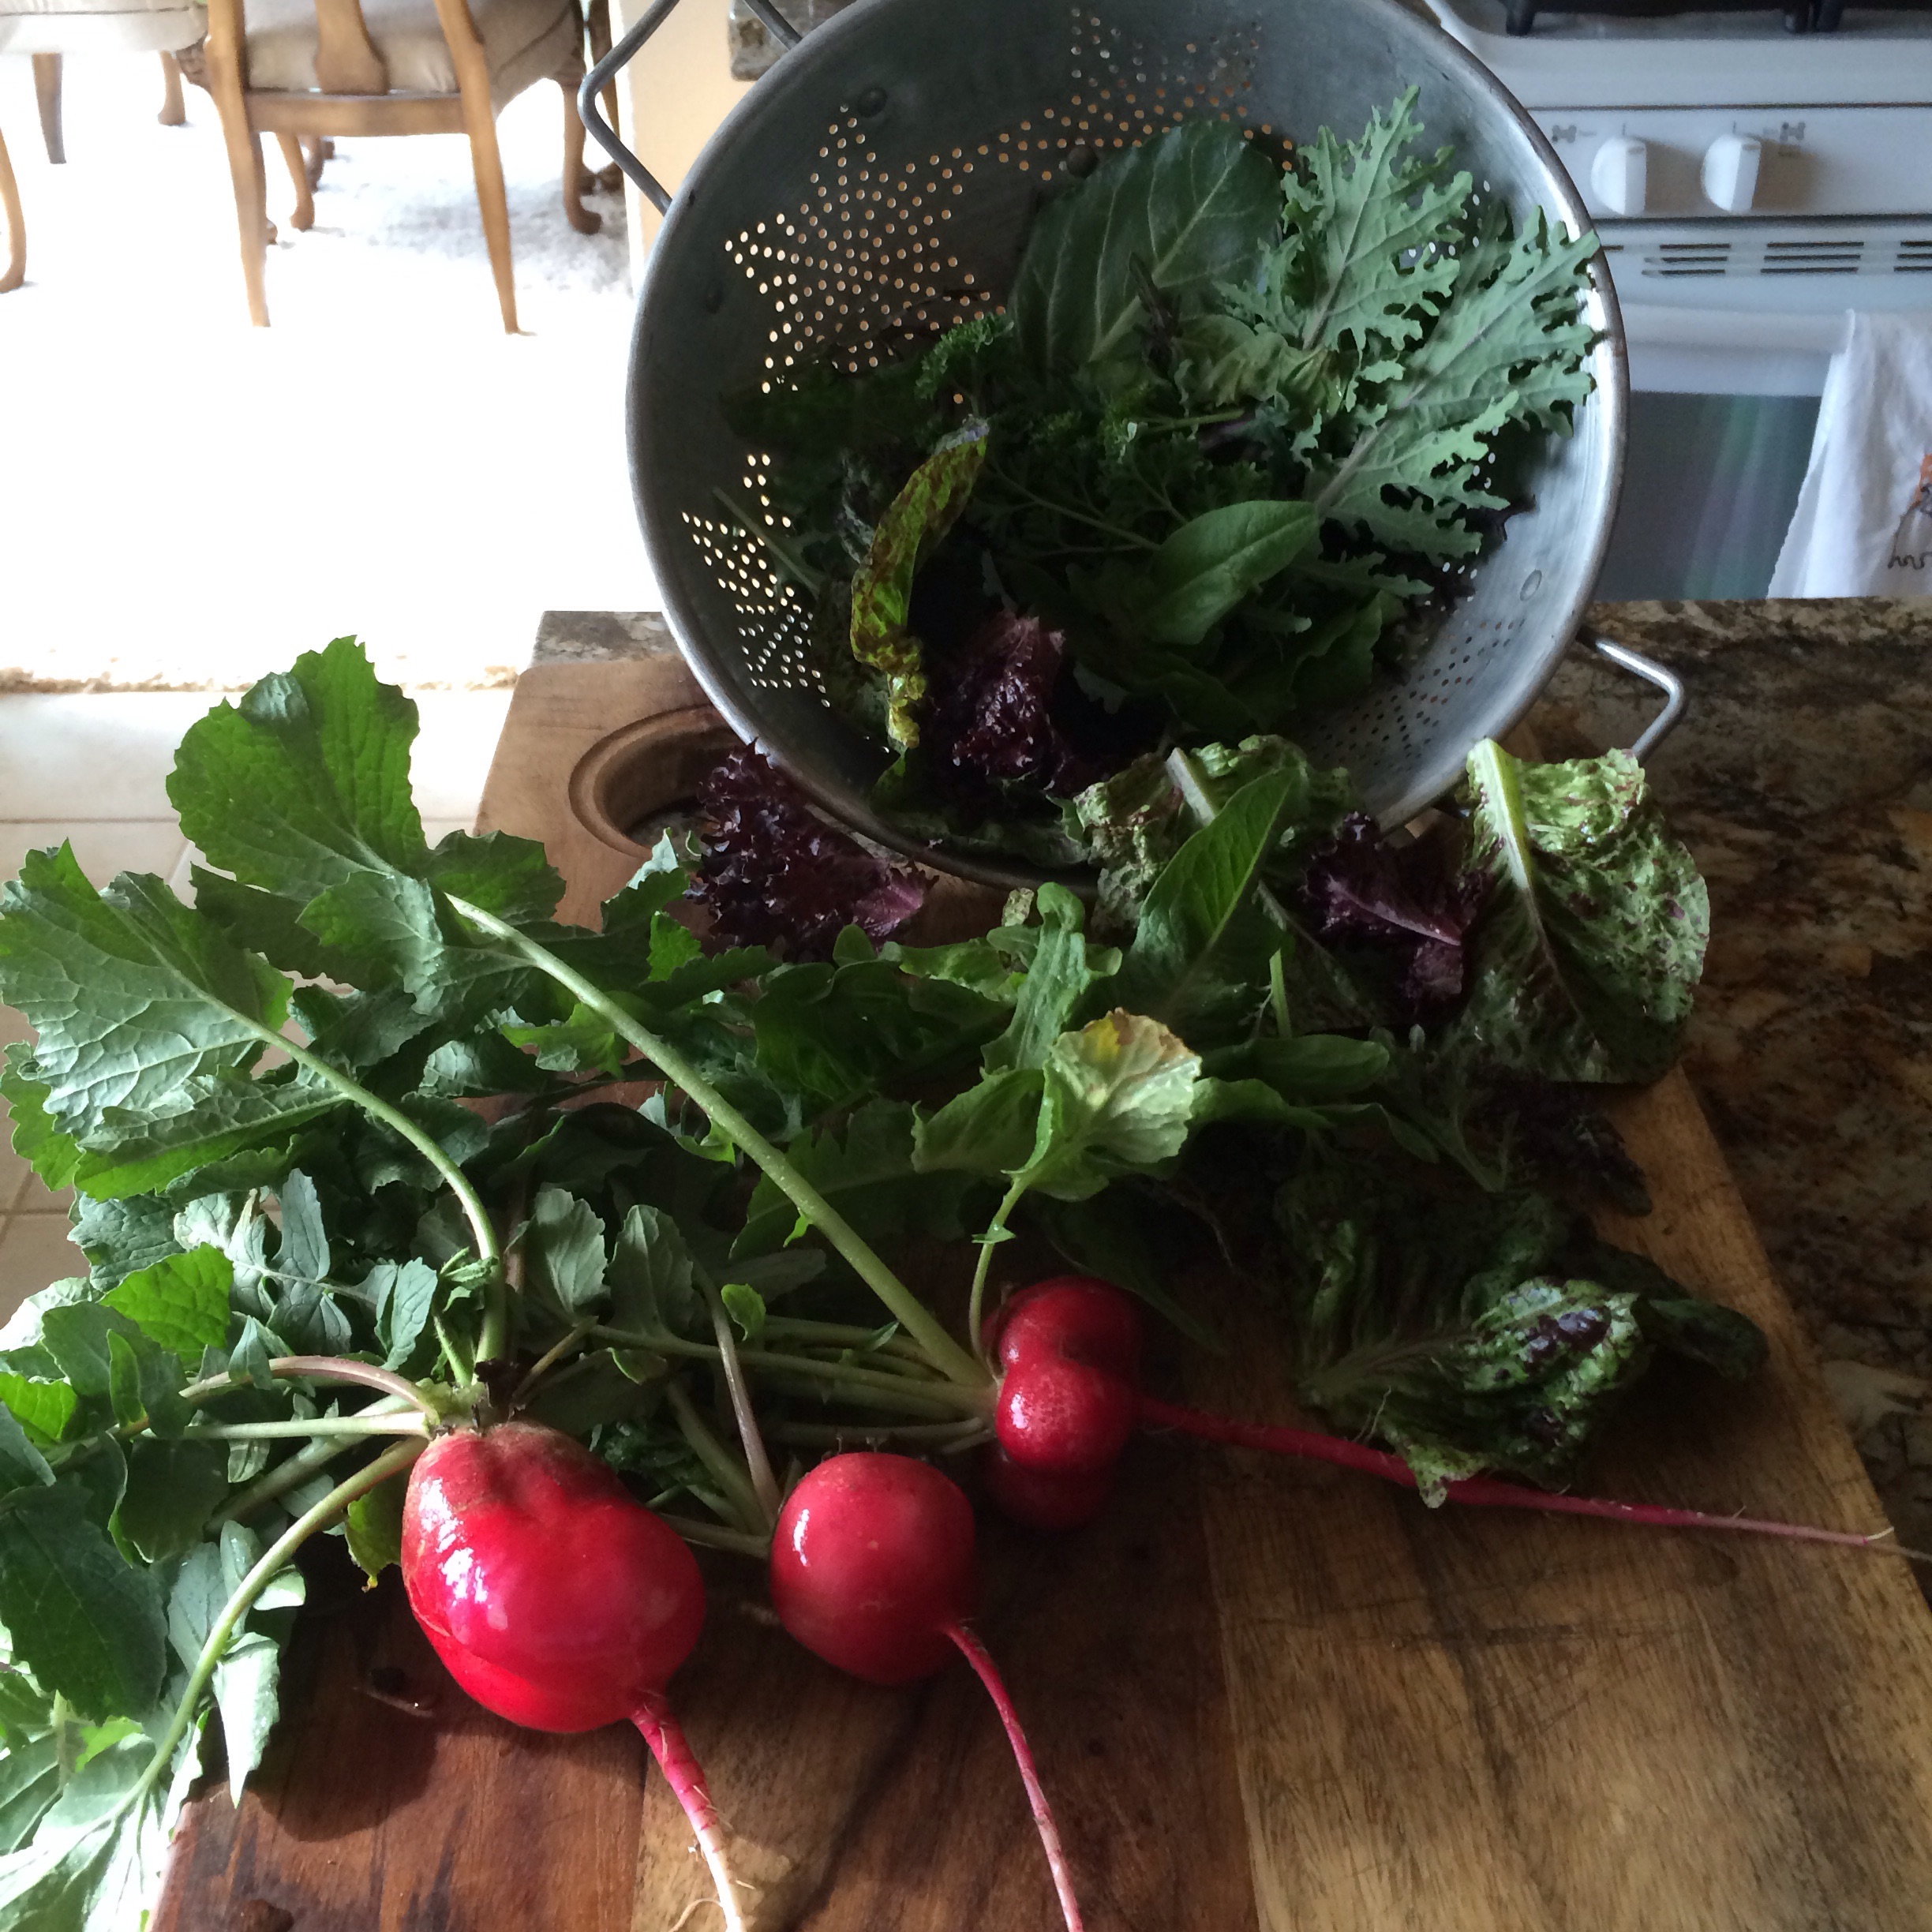 Harvested this morning for tonight's dinner it is so warm we will not have these greens for long